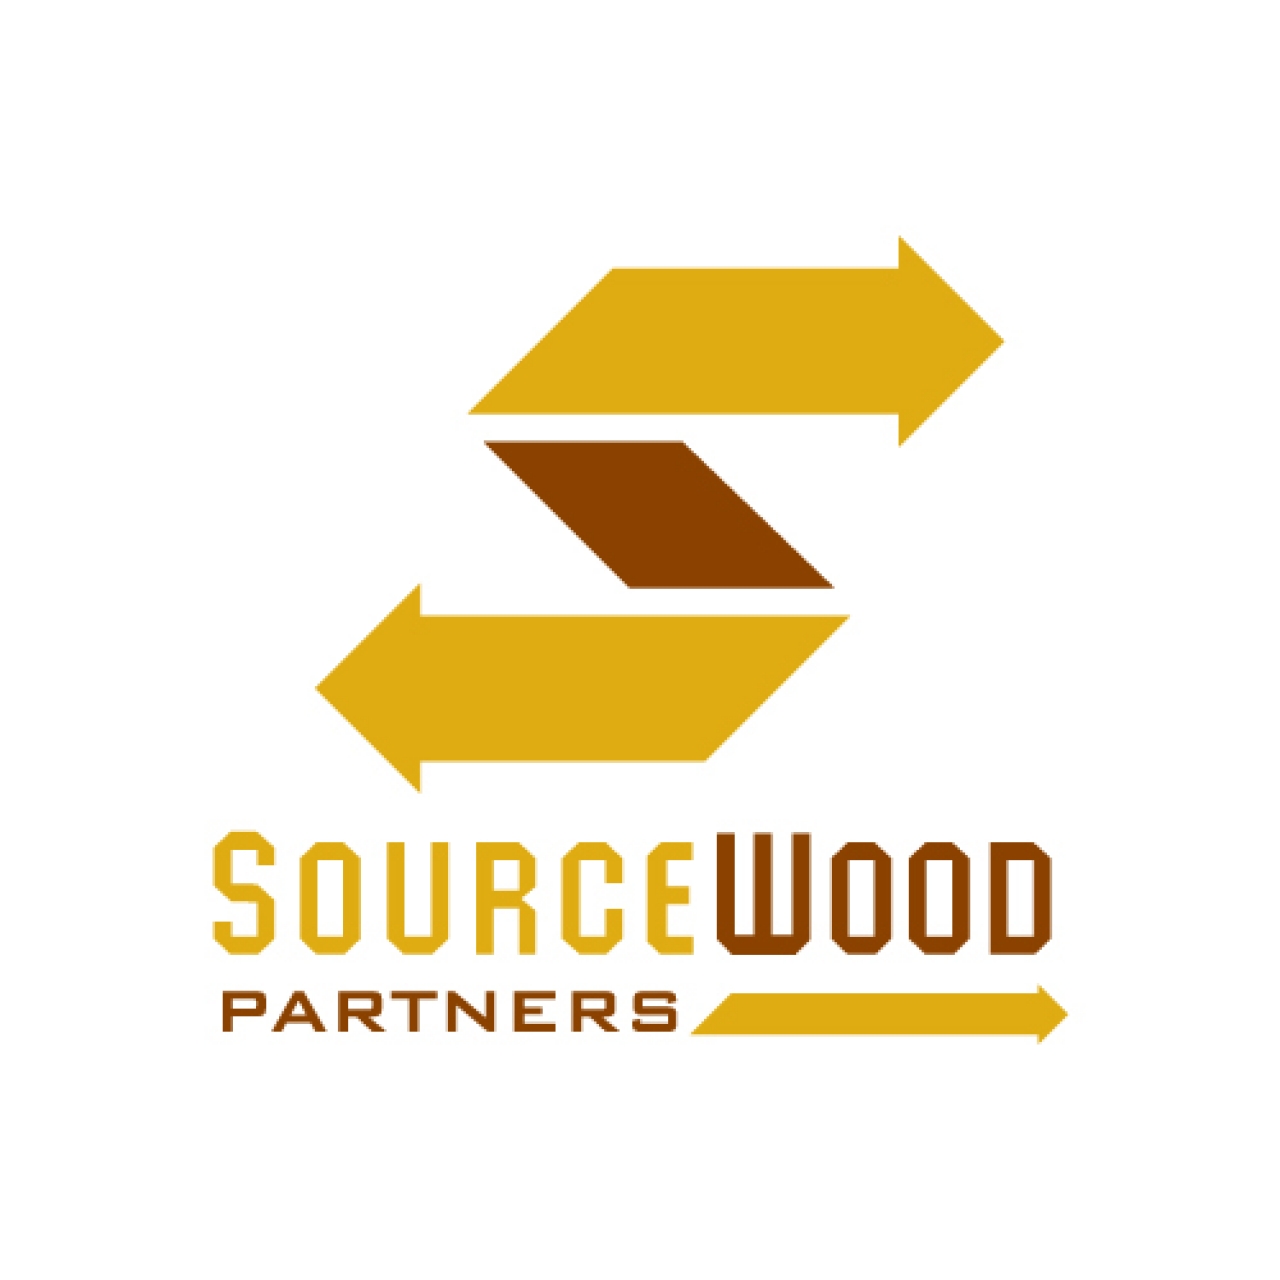 SourceWood logo is an S made of arrows